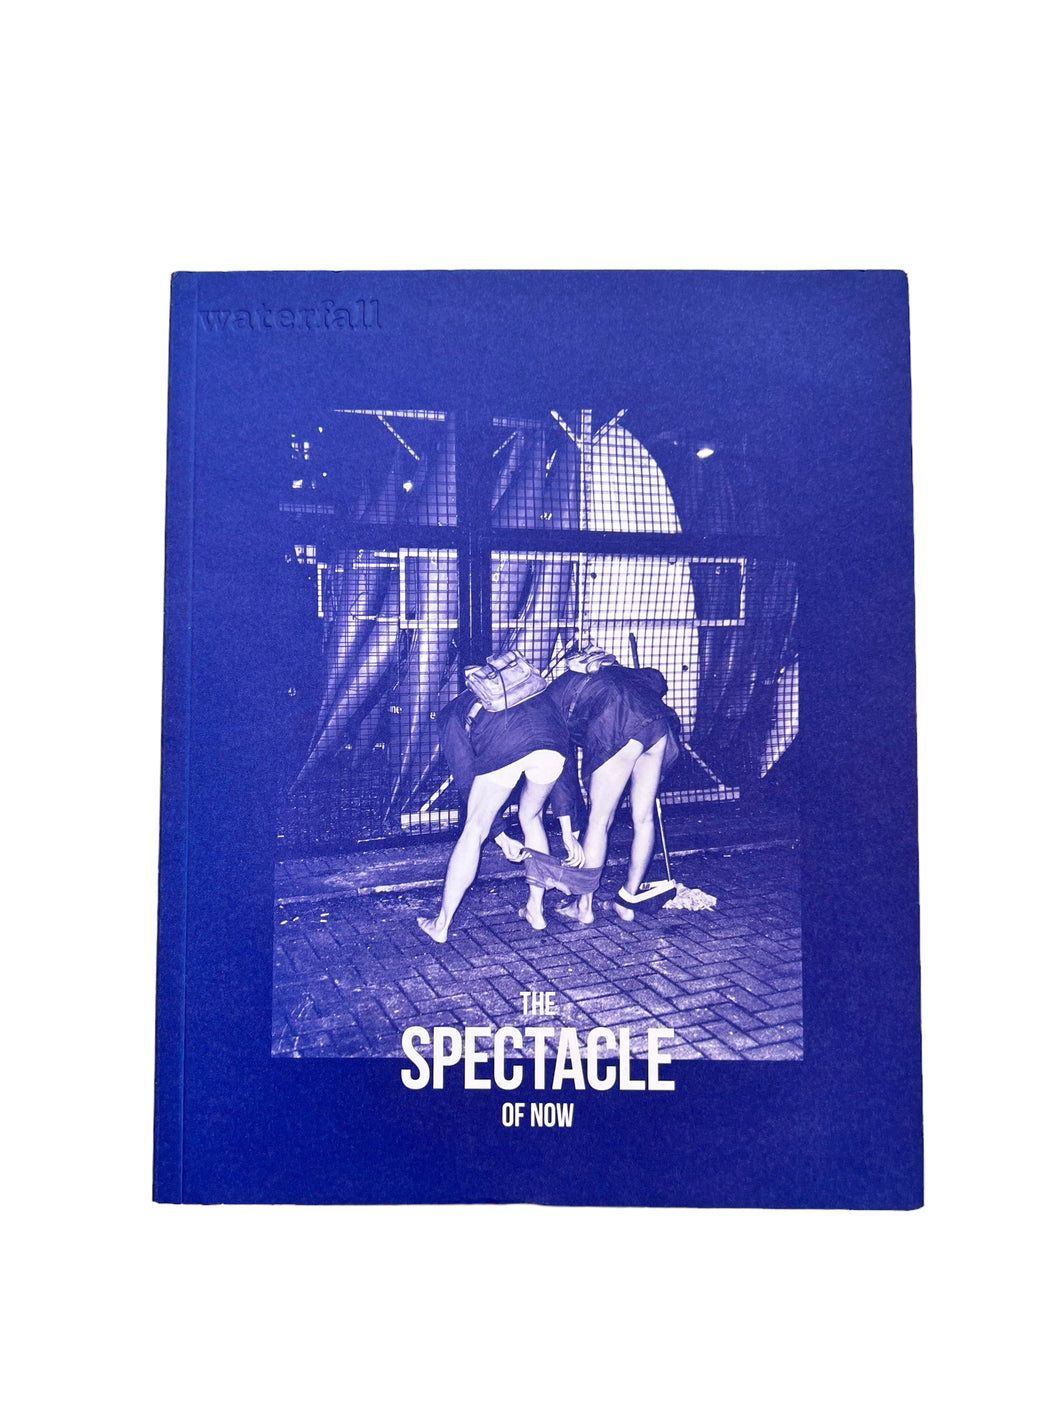 The Spectacle of Now Book - Waterfall Journal